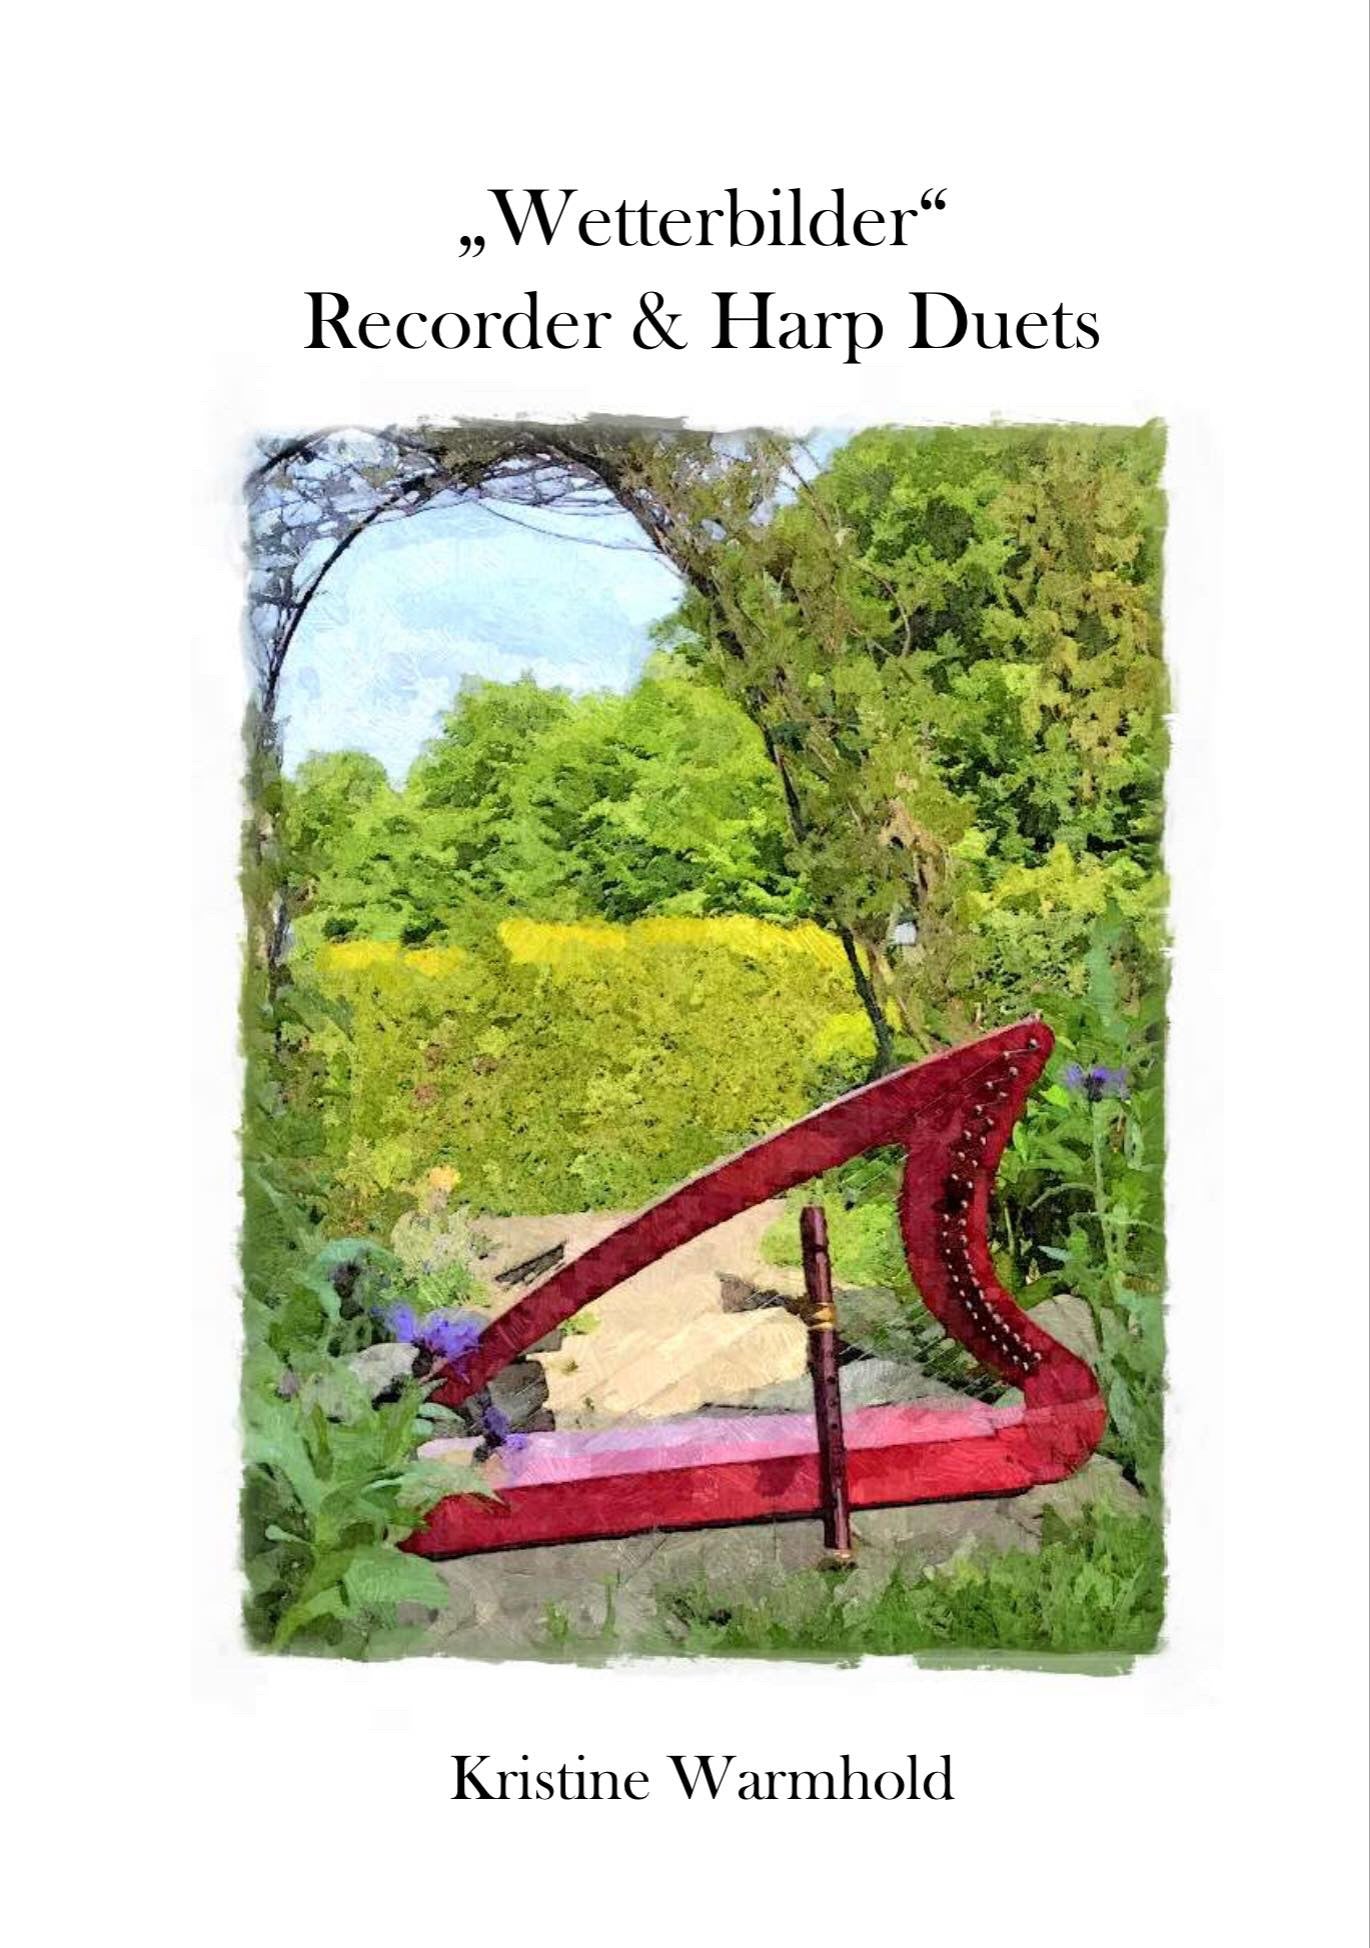 Adventuring With A Friend - duets for Adventurer 20 Harp and Recorder By Kristine Warmhold